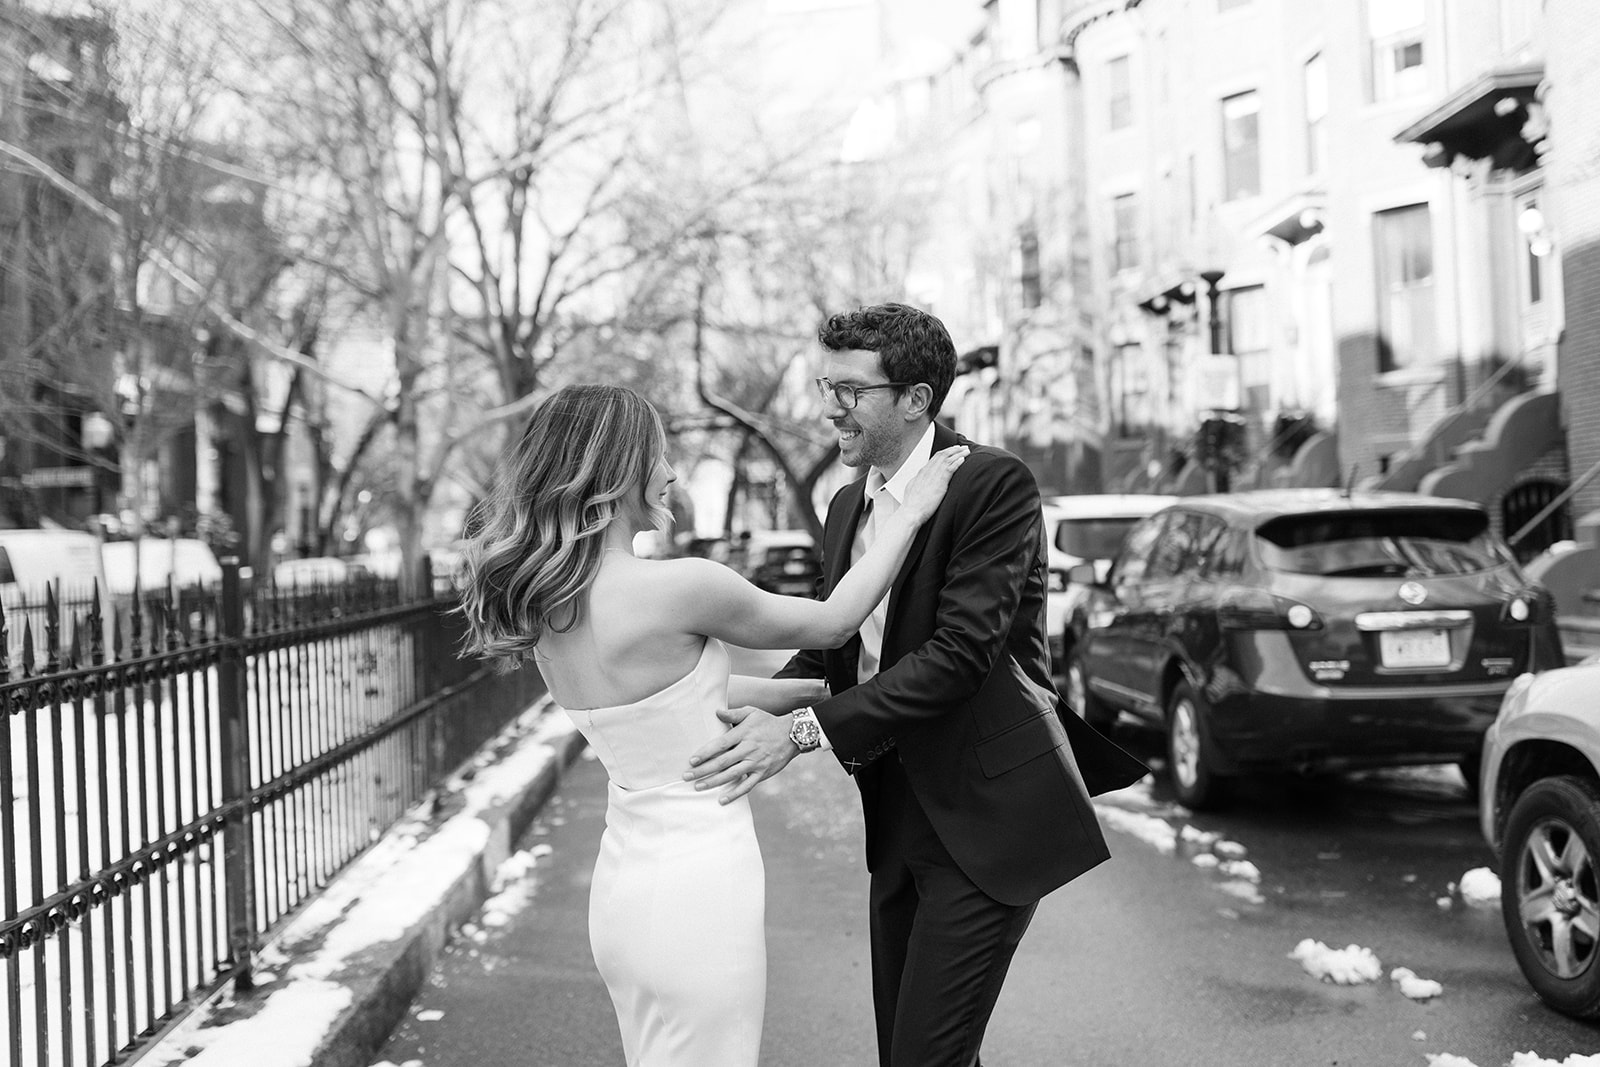 stunning bride and groom pose on the Boston streets after their dreamy winter elopement day!